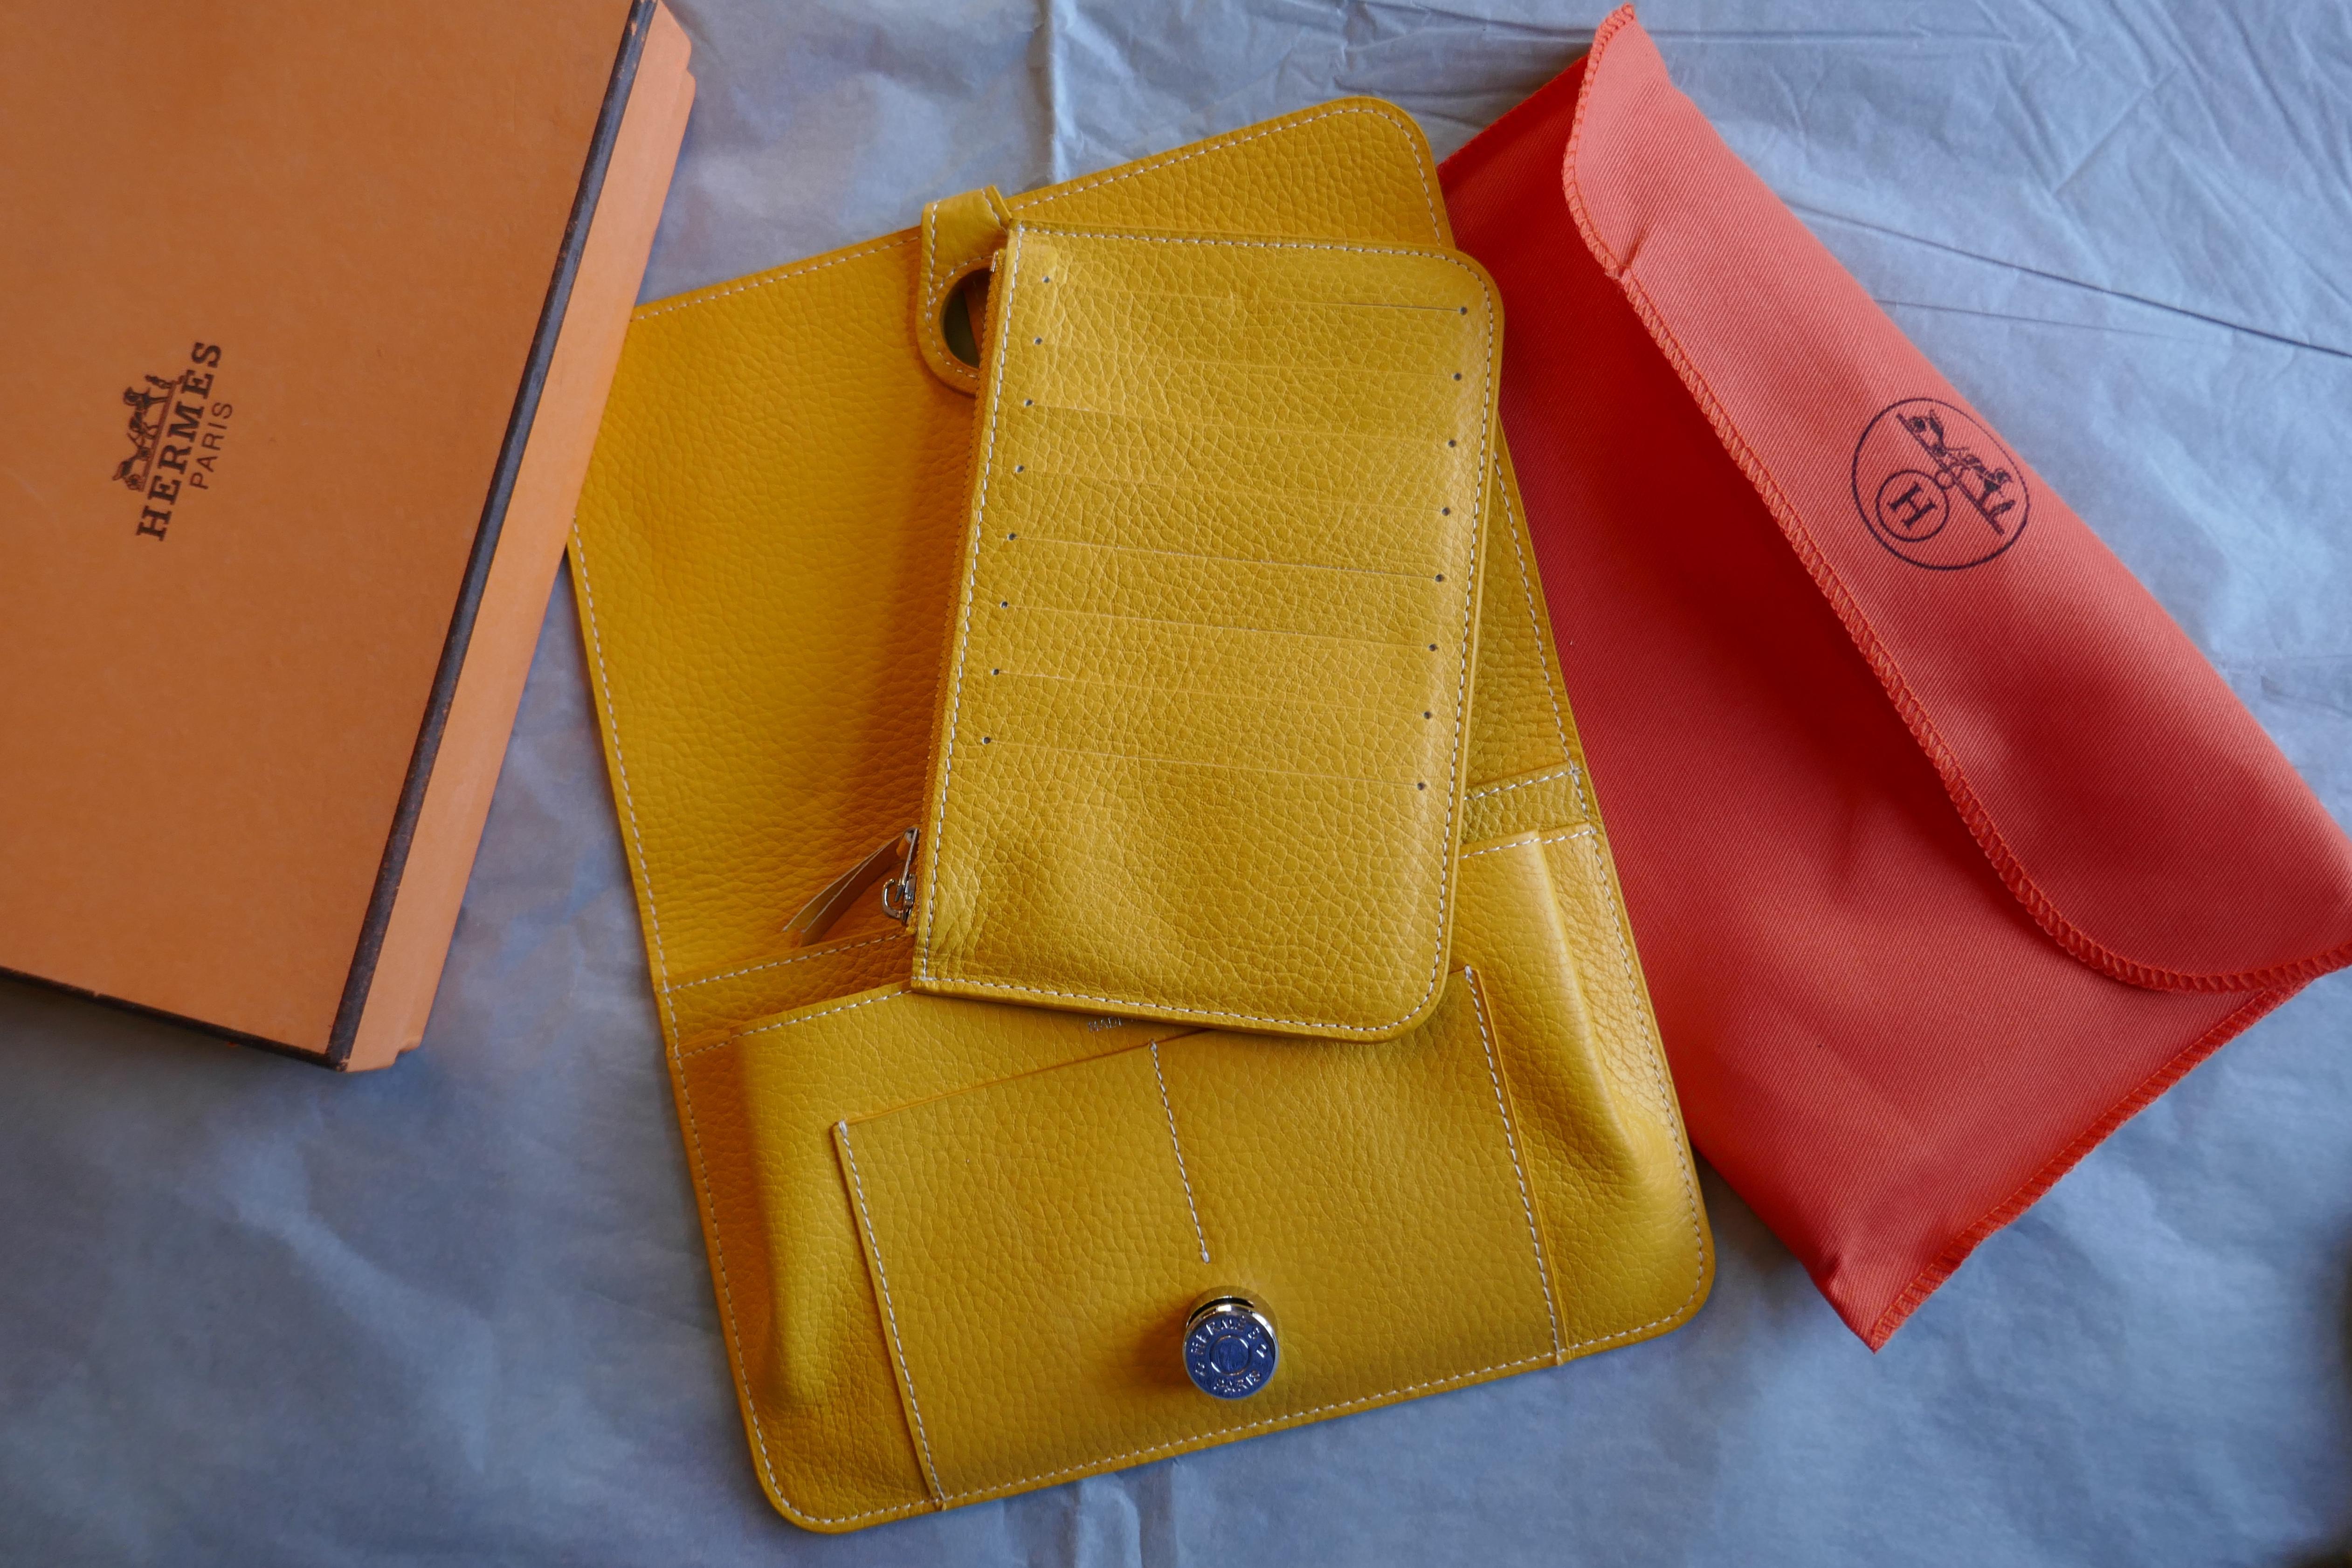 Ladies Hermes Yellow Togo Calfskin Dogon Duo Wallet with Purse  This beautiful wallet is made from Togo Calfskin and has a silver coloured metal fastening with a leather slide tab, reading 'HERMÈS PARIS’  The wallet has 2 sections, the front with 3